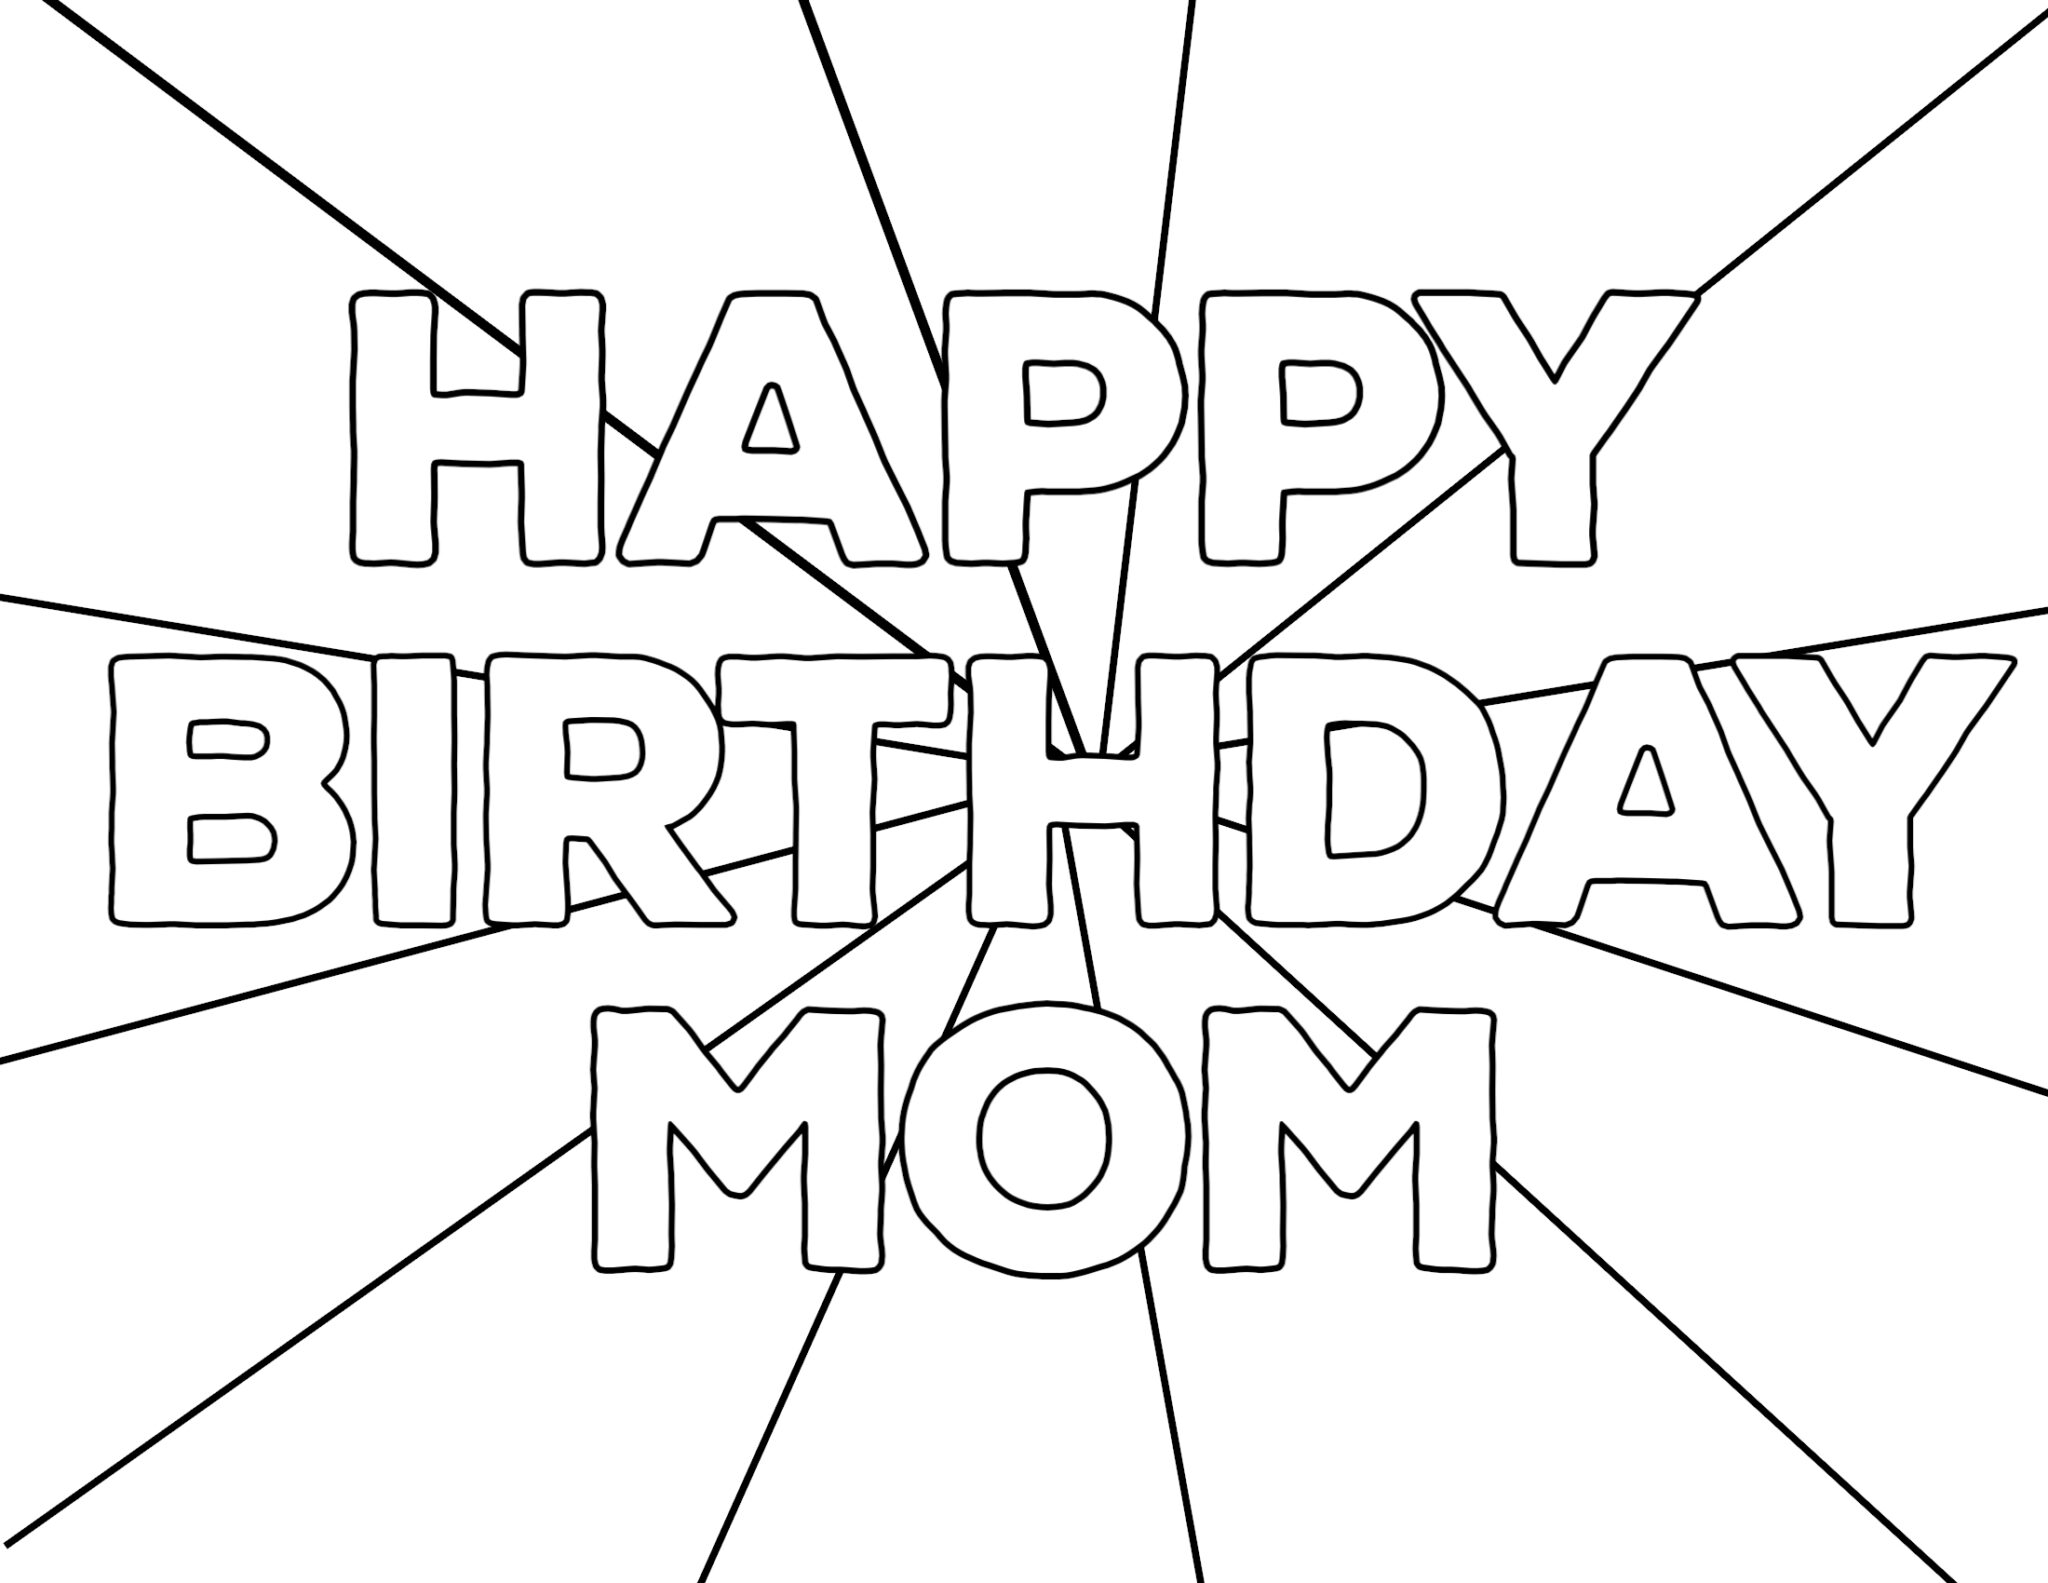 foldable-birthday-cards-for-mom-printable-coloring